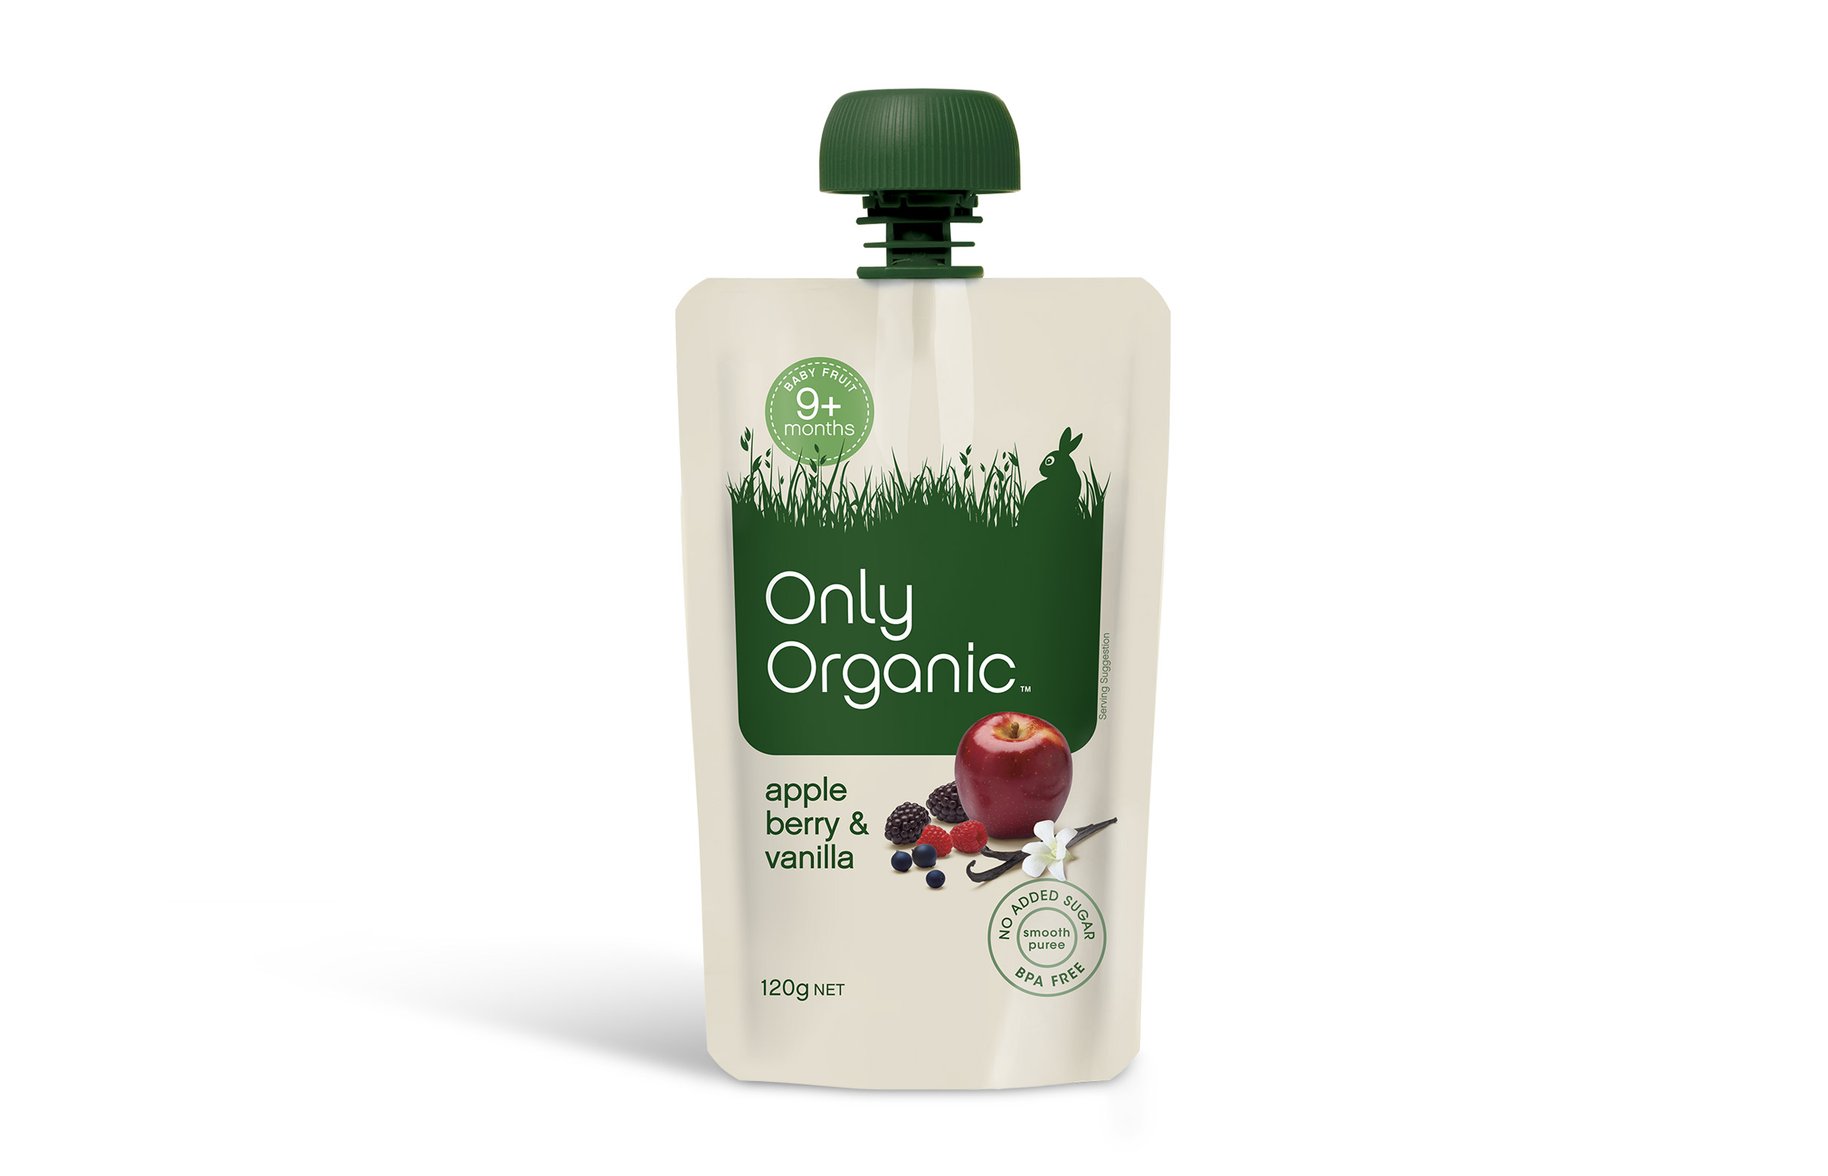 Only Organic apple berry and vanilla baby food packaging